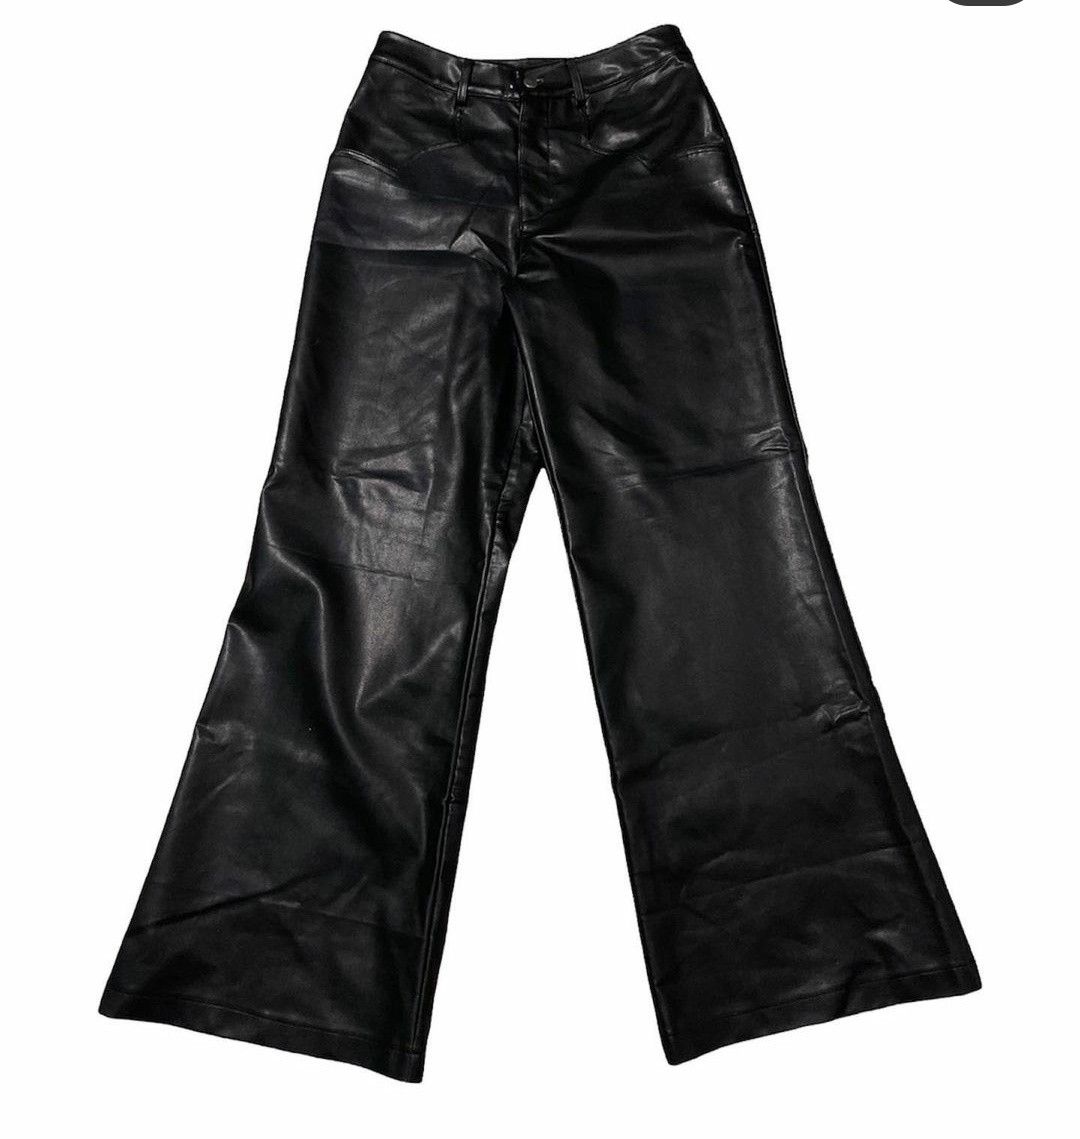 Japanese Brand Rustial Flared Bootcut Leather Pants | Grailed